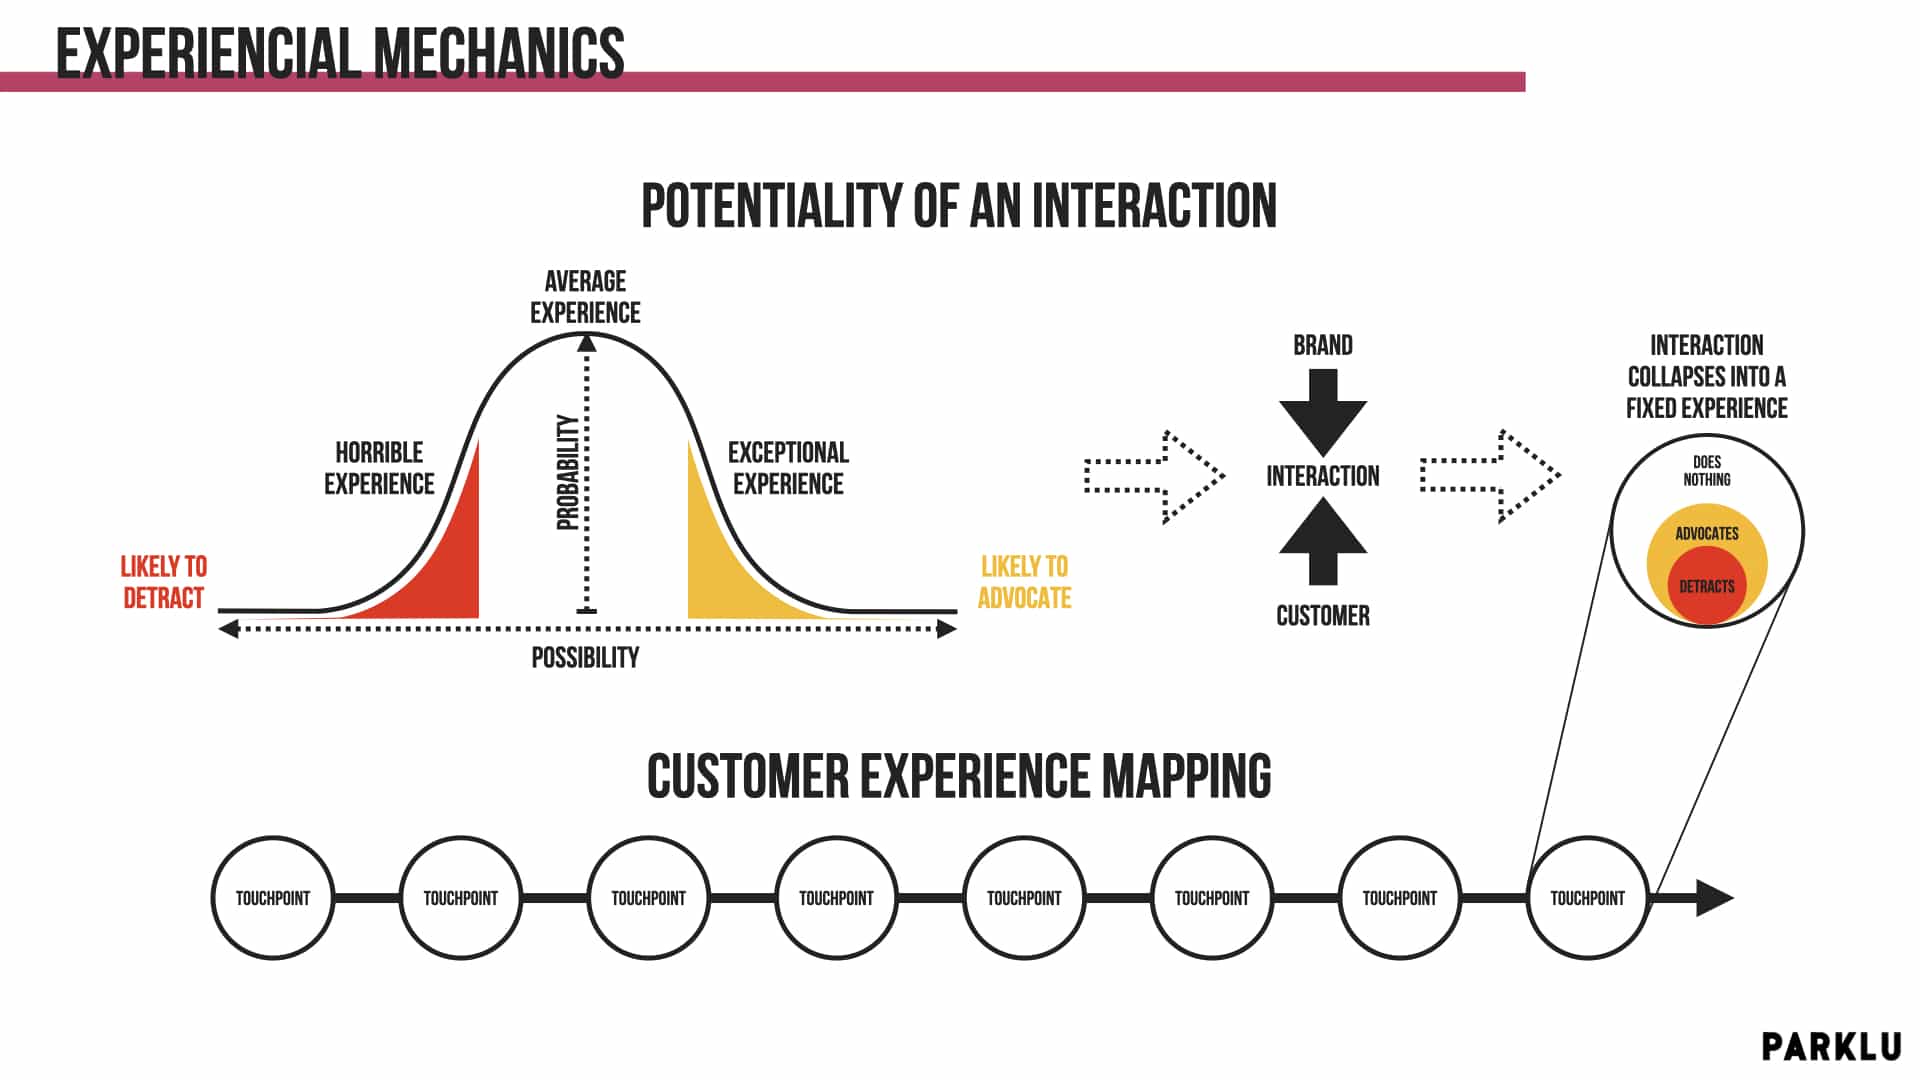 Experiential Marketing Mechanics Potentiality of an Interaction